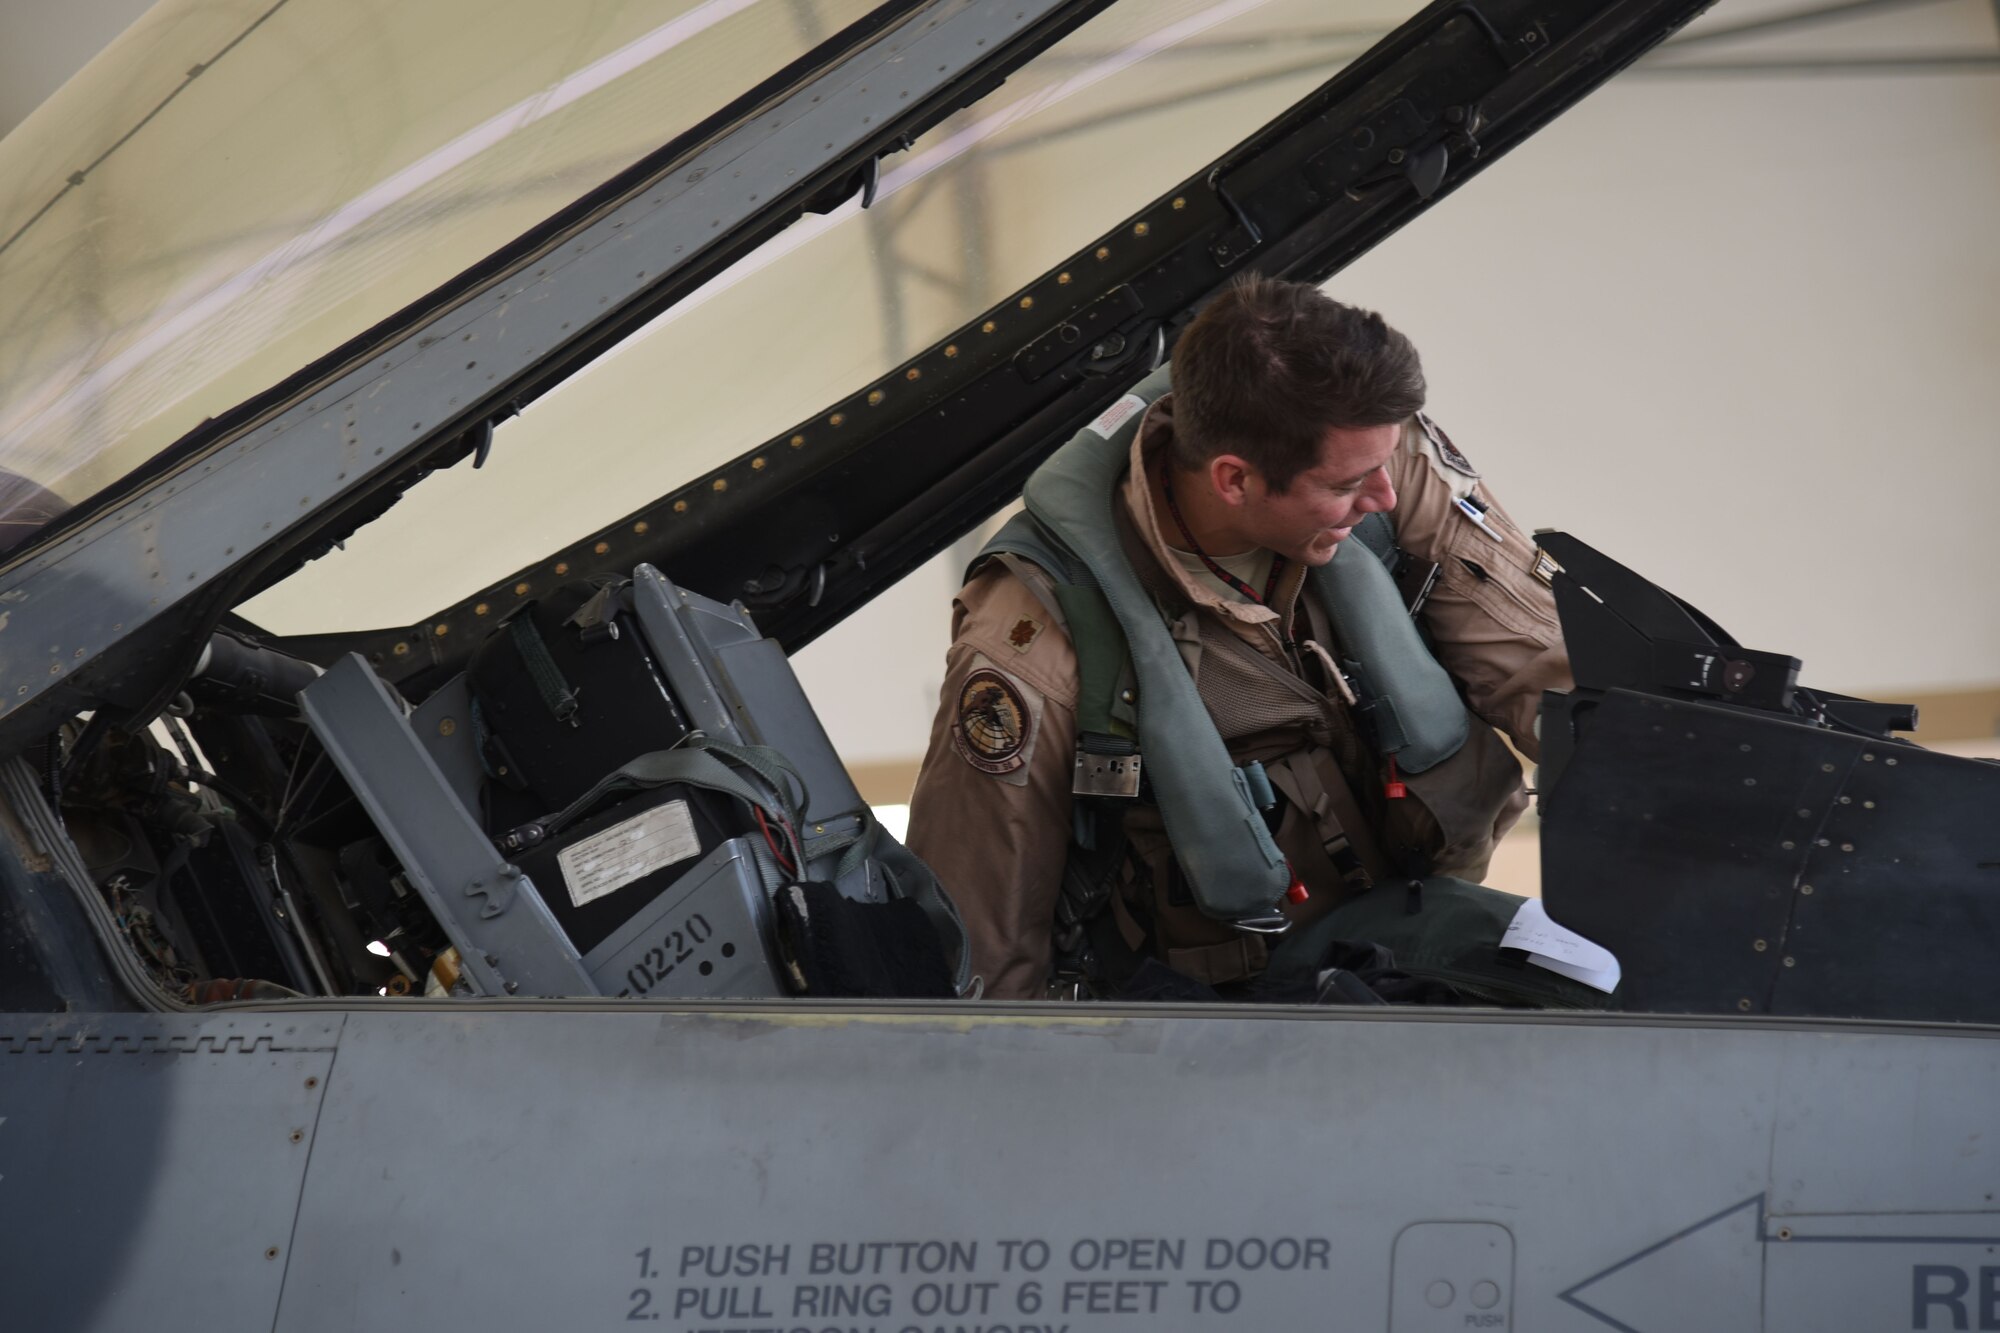 A 100th Expeditionary Fighter Squadron pilot checks his cockpit before a flight at an undisclosed location in Southwest Asia, Jan. 20, 2018. This was one of the final steps for the pilot before returning home from his deployment. (U.S. Air Force photo by Staff Sgt. Joshua Edwards/Released)